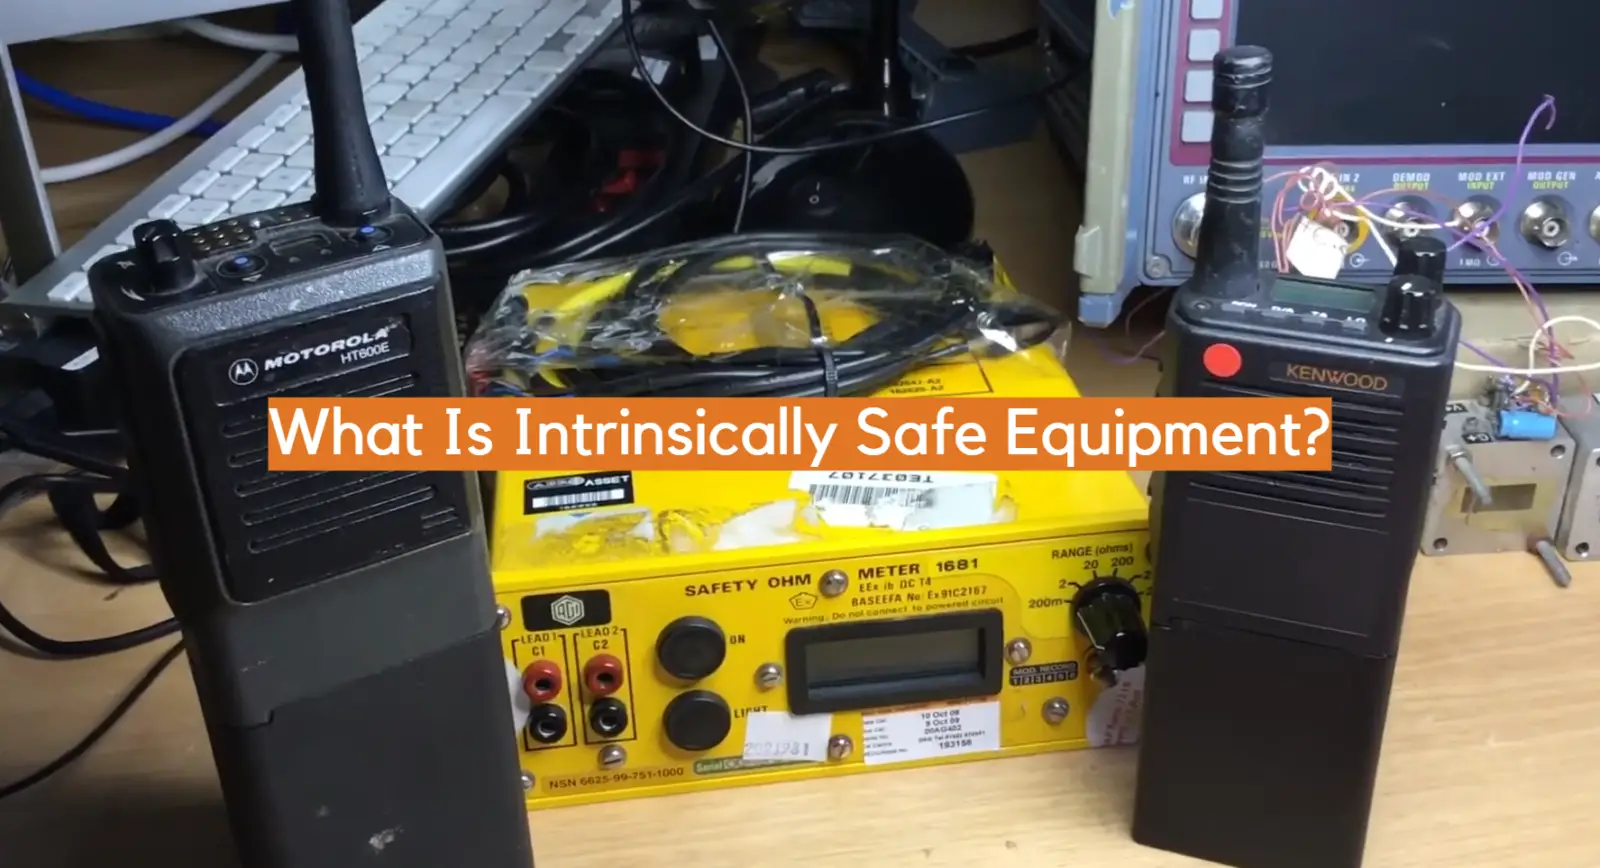 What Is Intrinsically Safe Equipment?